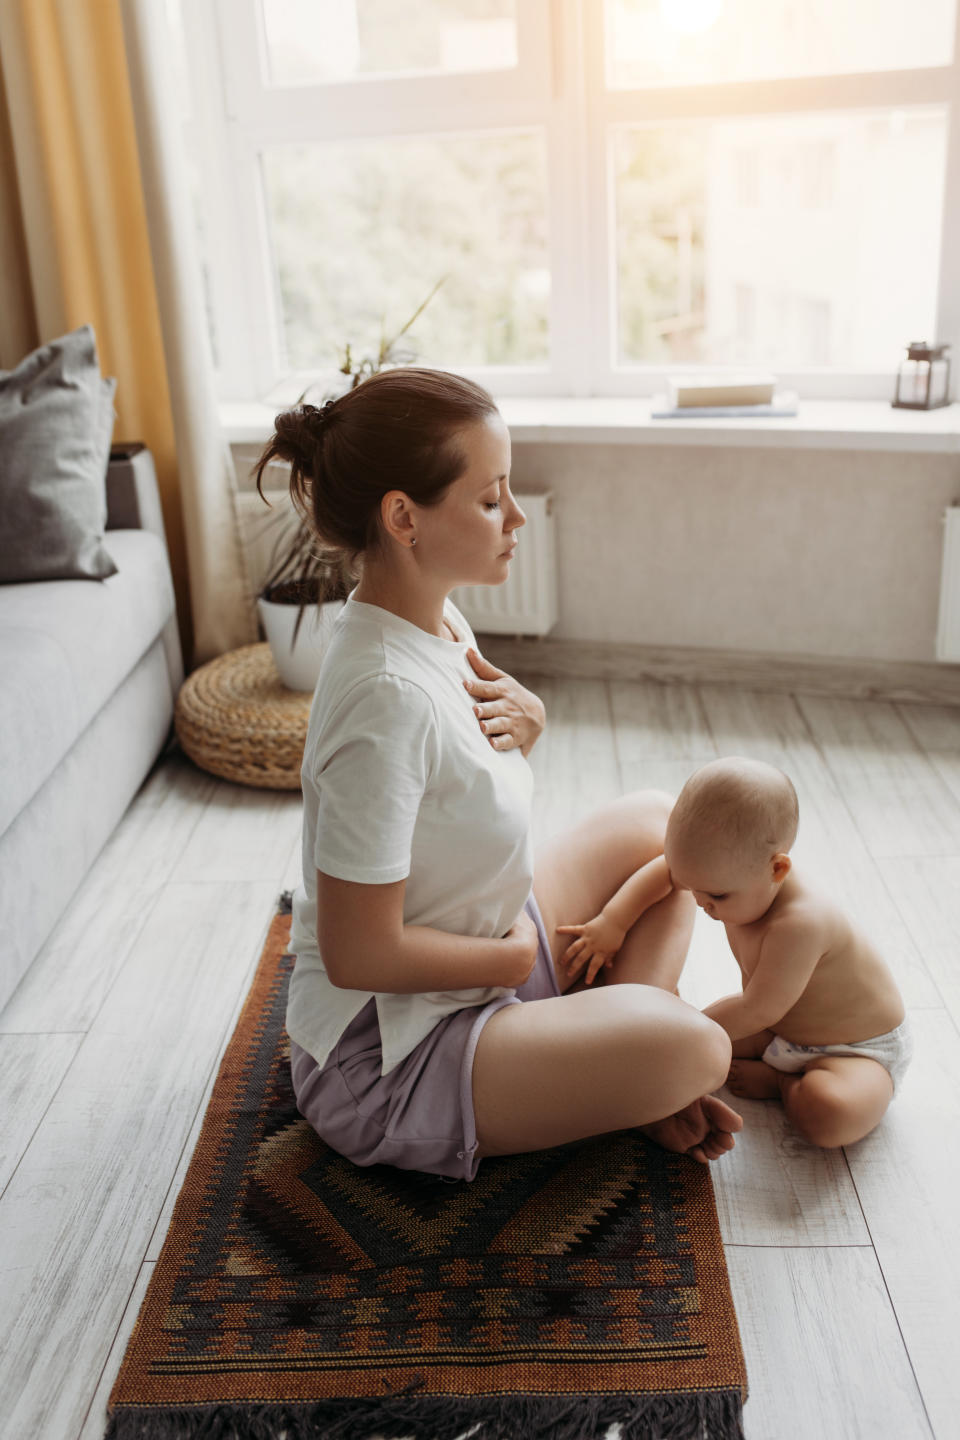 Moms going through a postpartum period should consider practicing mindfulness. (Photo via Getty Images)